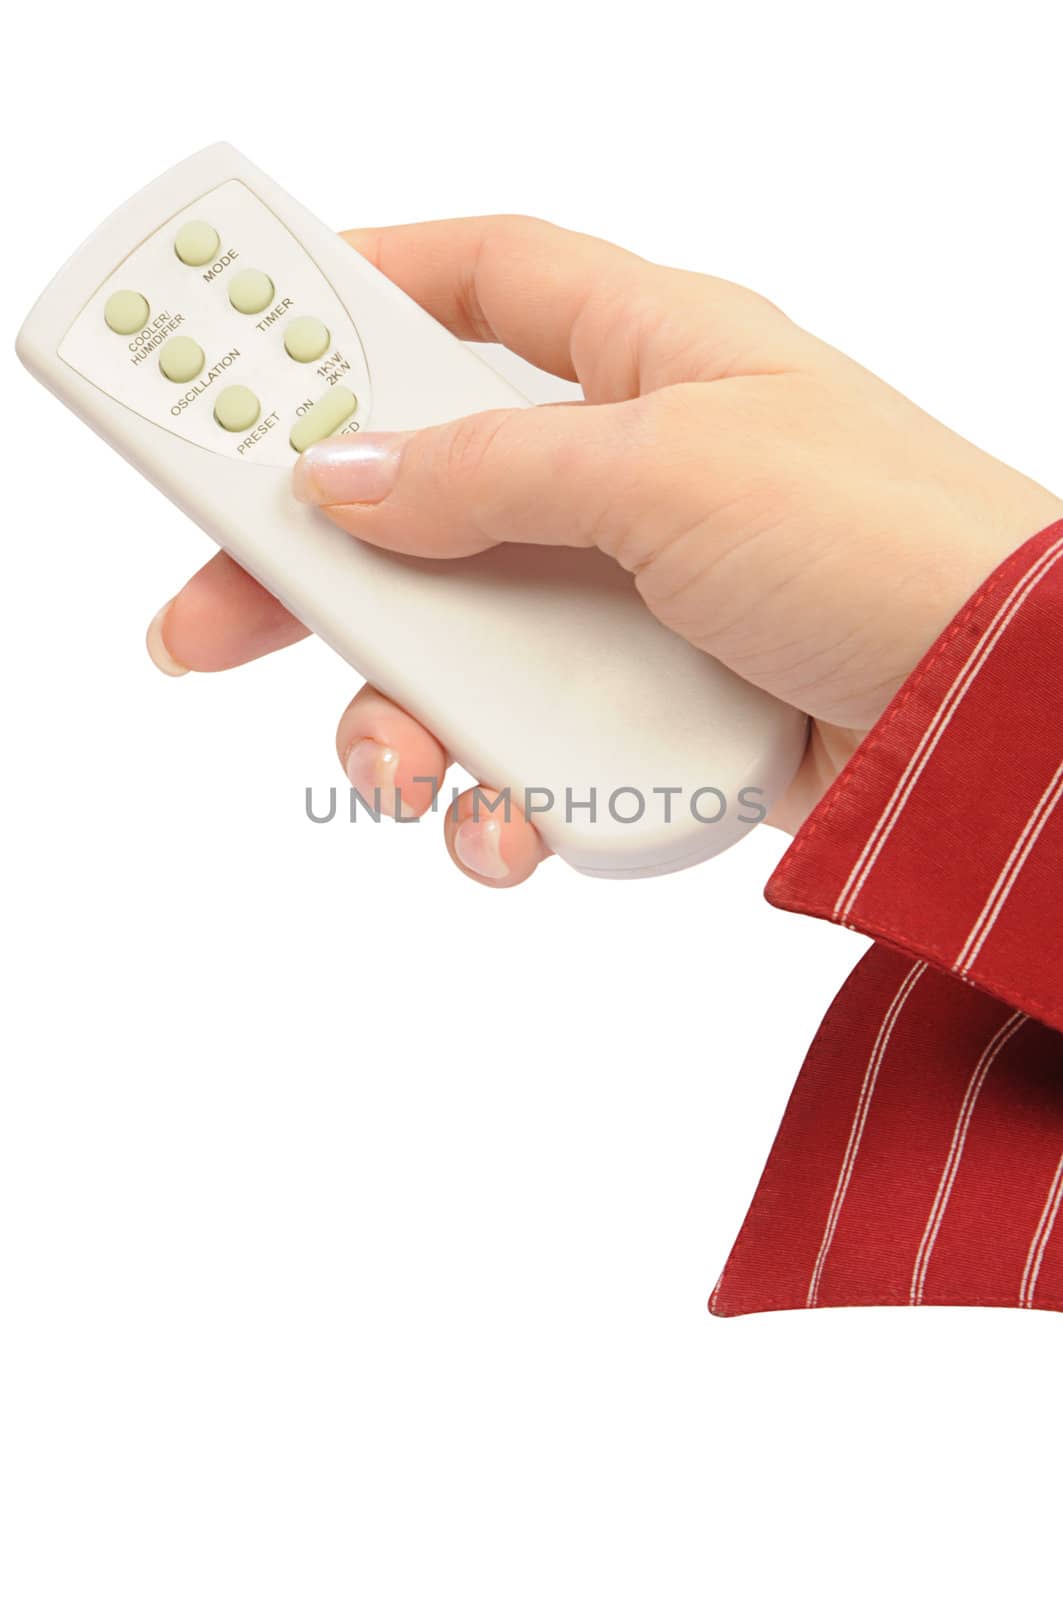 womanish hand holds remote control unit